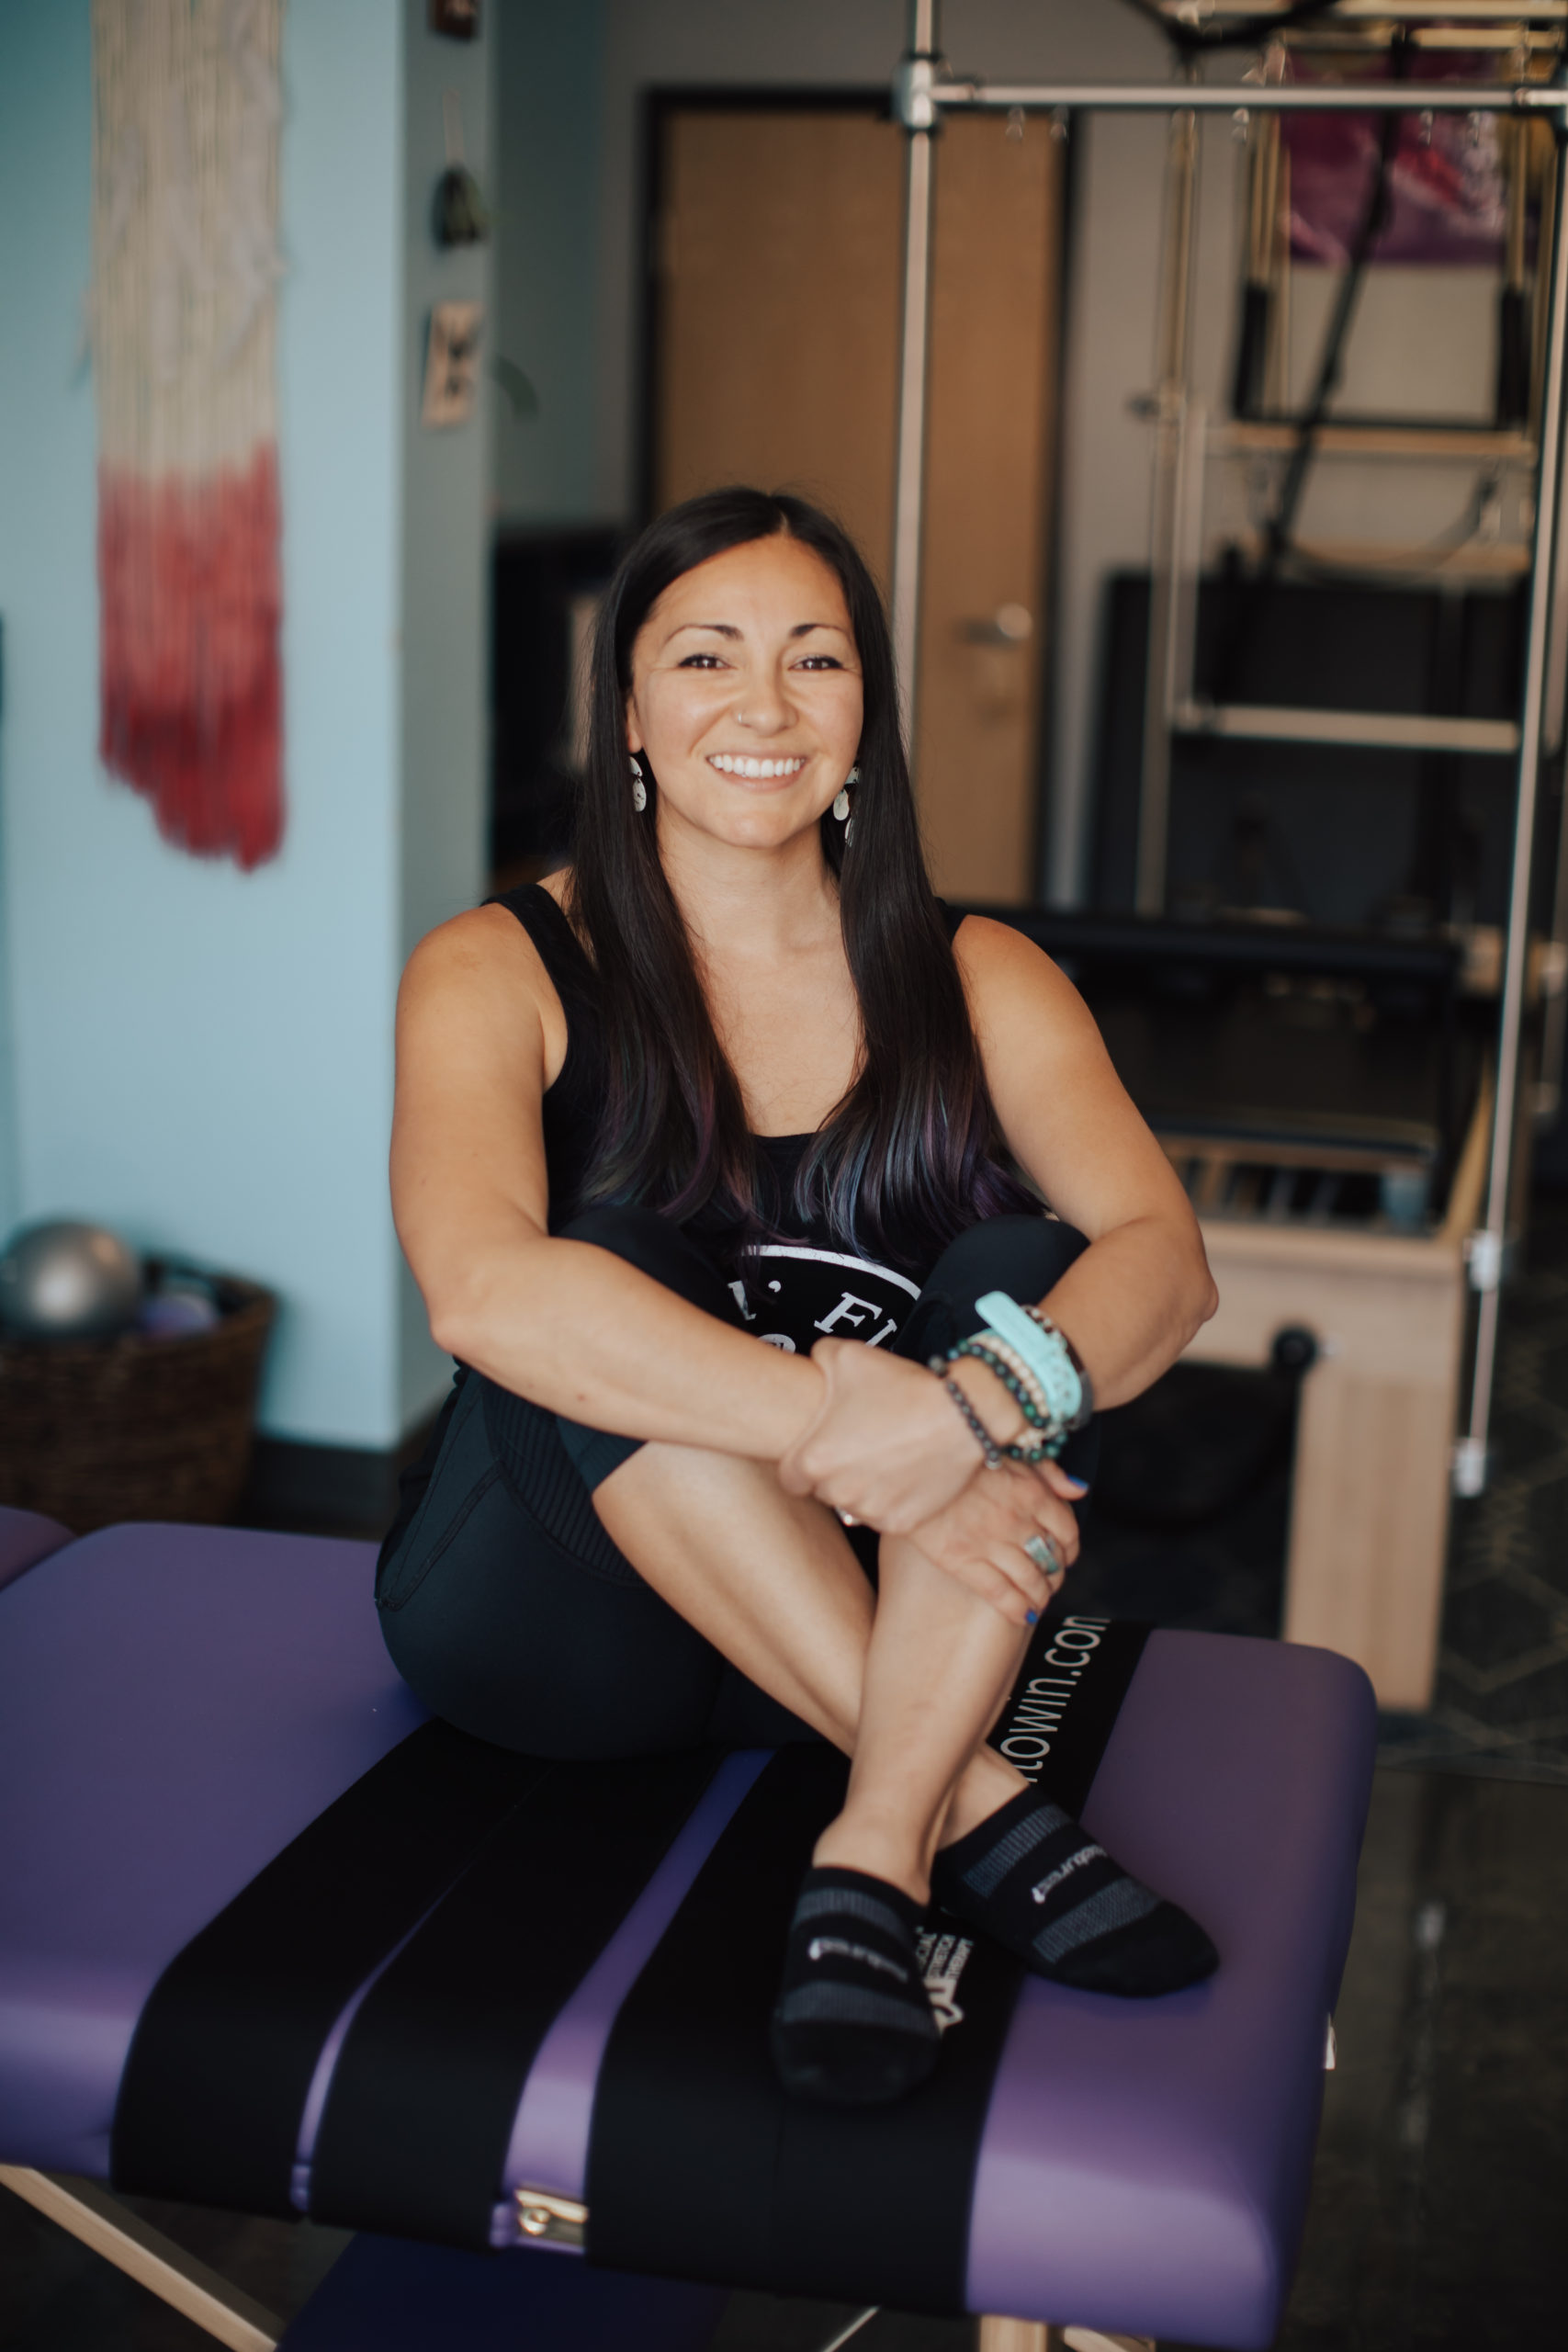 Pilates instructor wearing all black, sitting crossed legged on a purple stretch table.